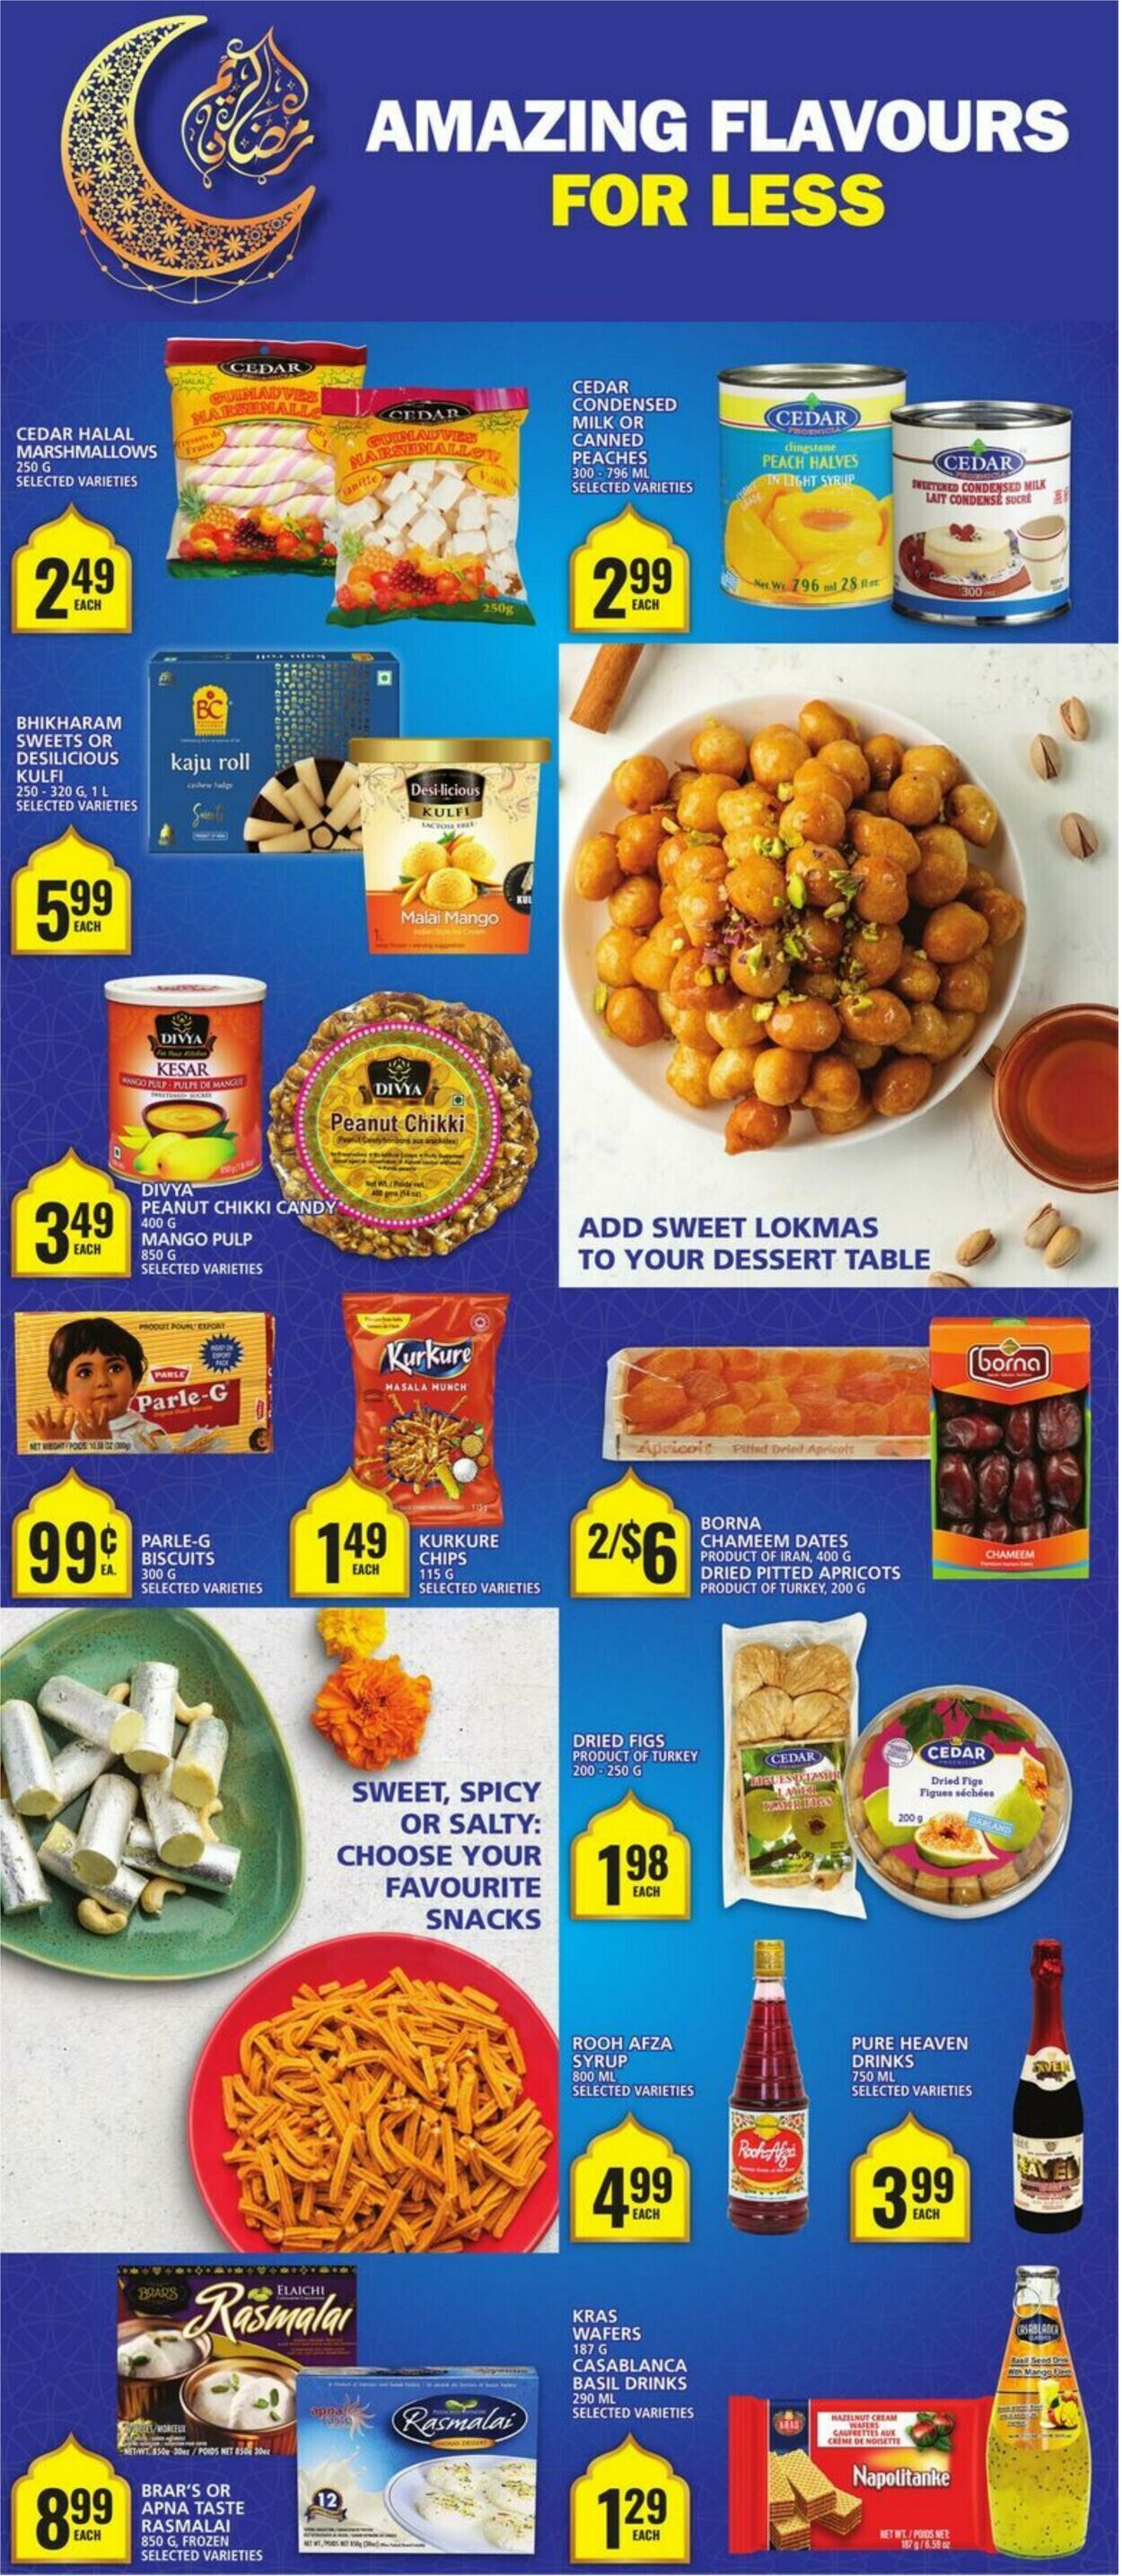 Food Basics Flyer from 03/21/2024